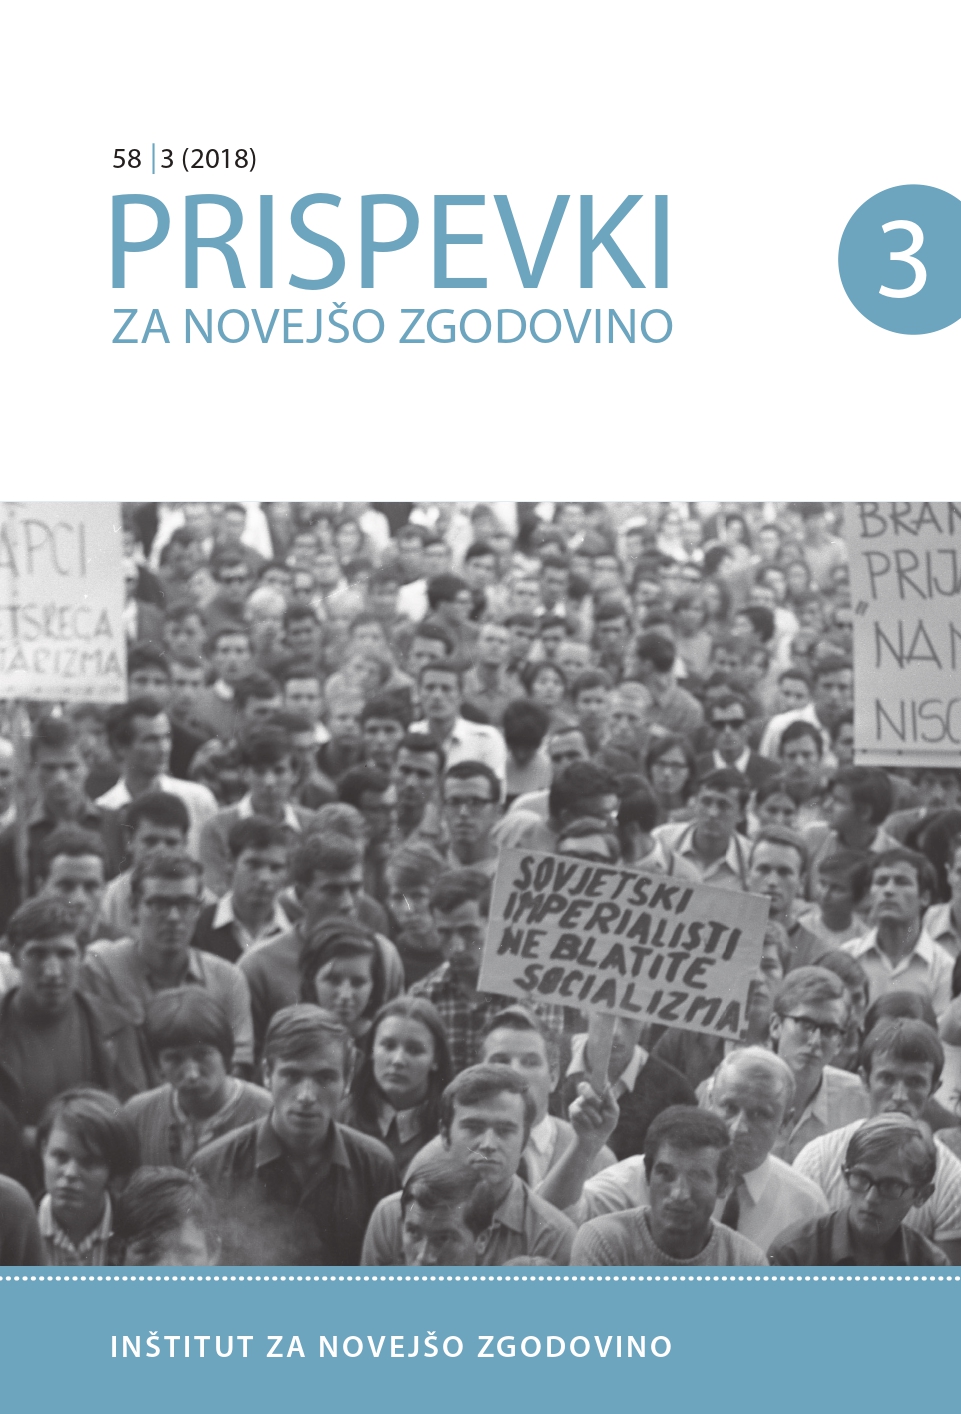 Nevenka Troha: Report Prepared by the Minister of Internal Affairs of the People’s Republic of Slovenia Boris Kraigher at the Meeting of the Politburo of the Central Committee of the Communist Party of Slovenia on 9 March 1950 Cover Image